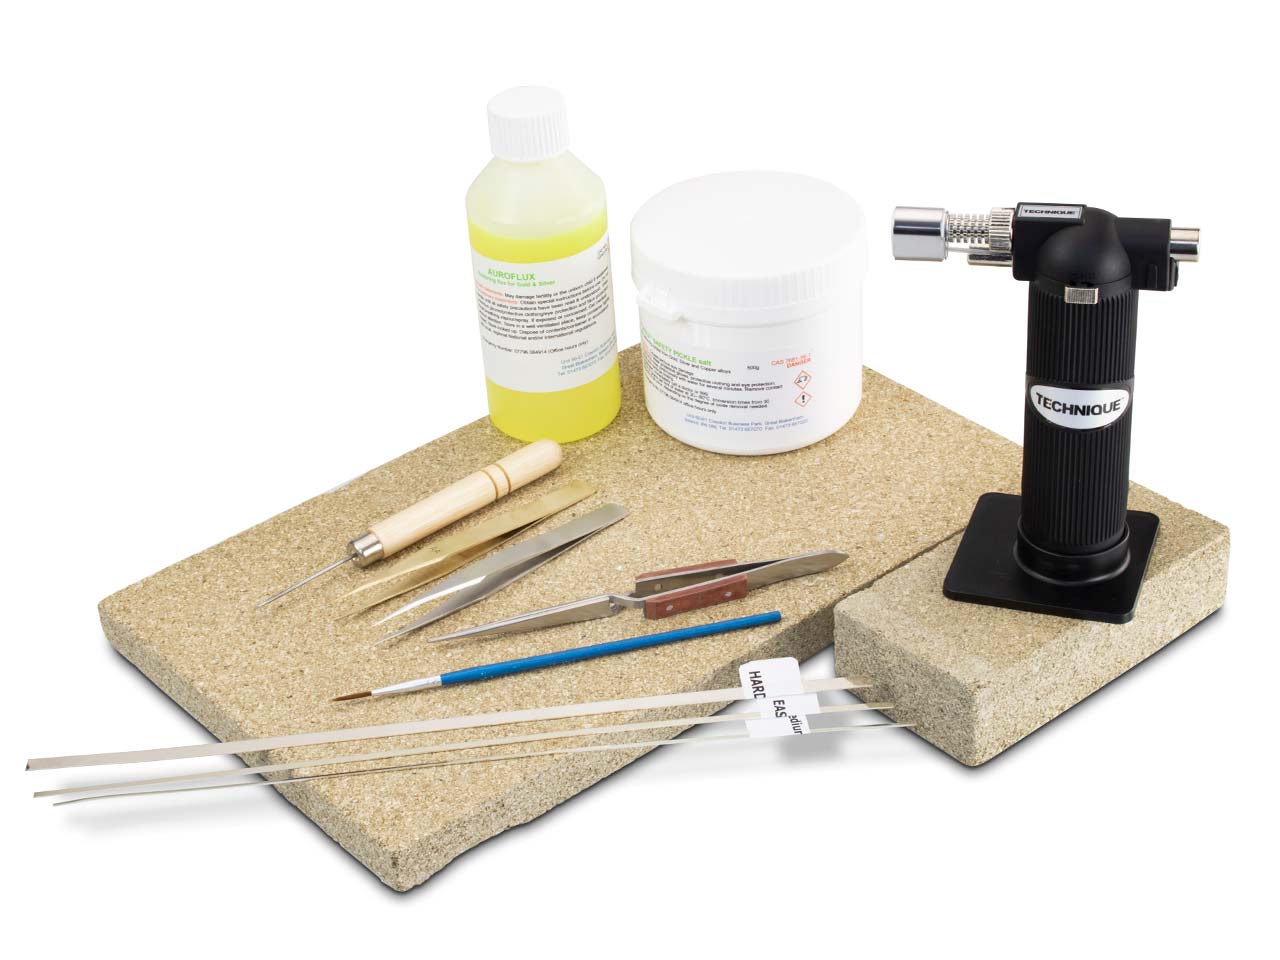 Standard Jewelry Soldering Kit with Silver Solder Wire & Butane Torch Kit  for Jewelry Making Project & DIY Projects